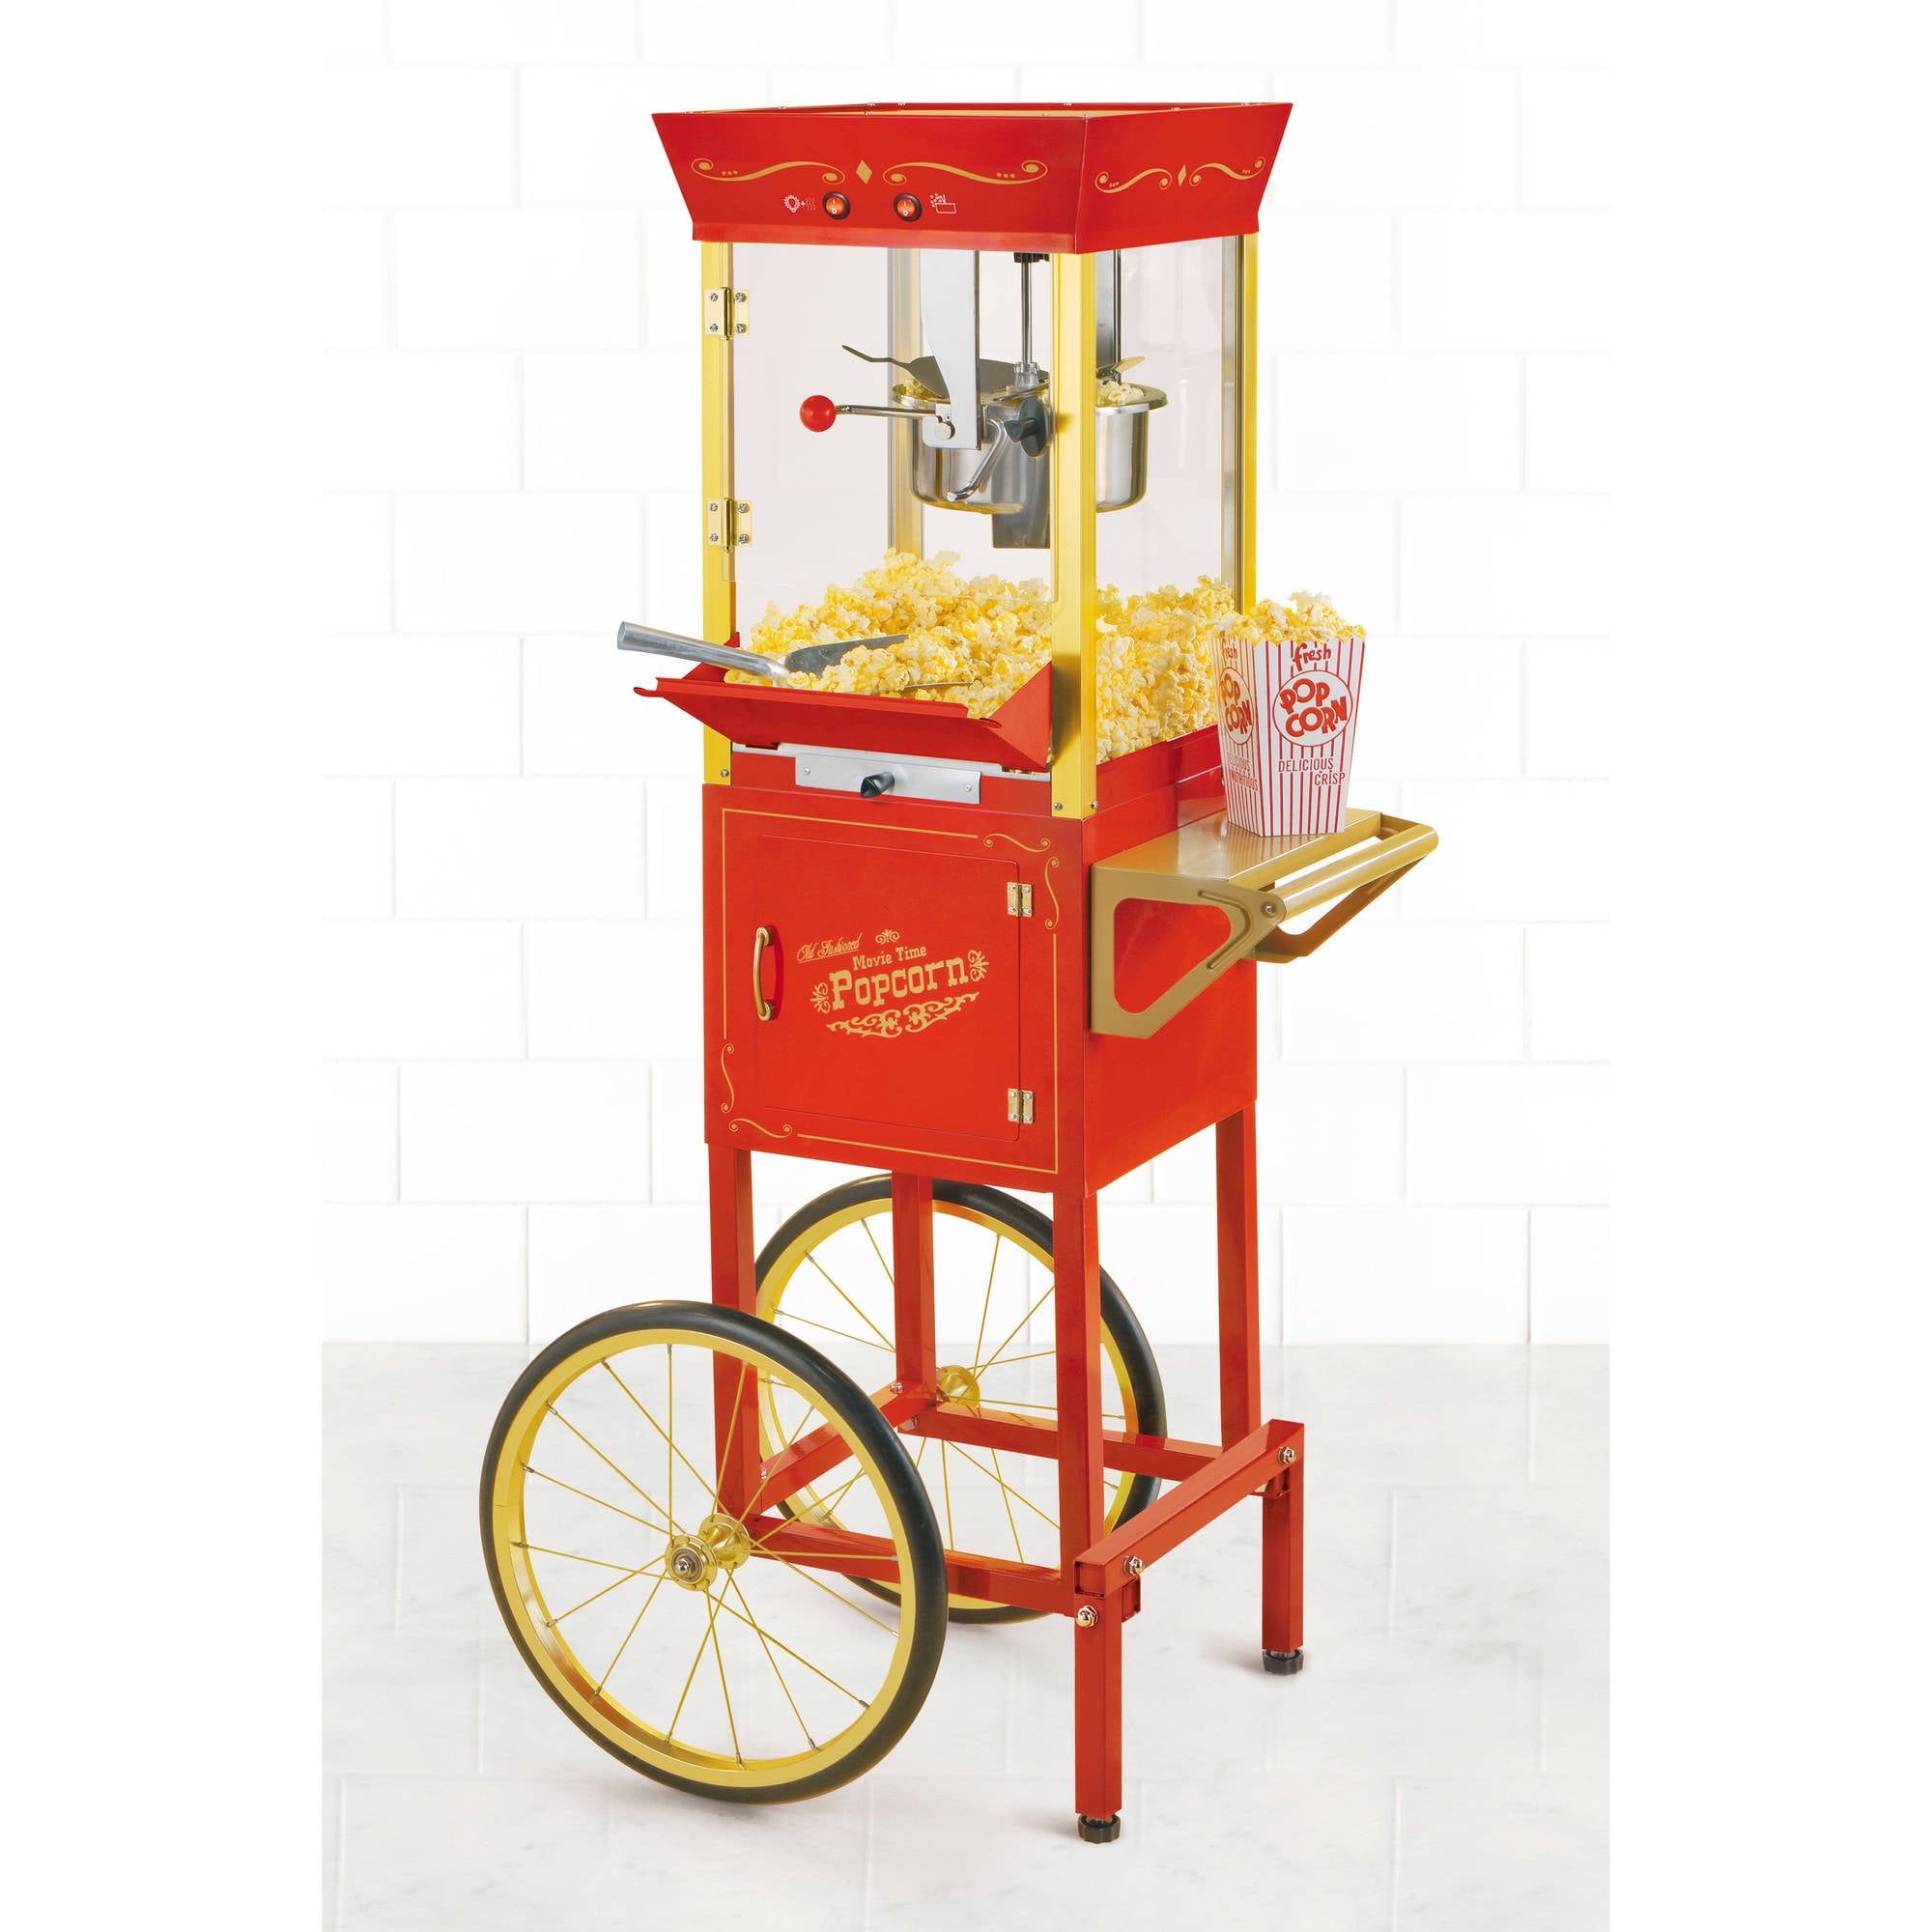 Nostalgia 8 Oz Professional Popcorn And Concession Cart Makes 32 Cups 53 In Tall Red Ccp510 Walmart Com